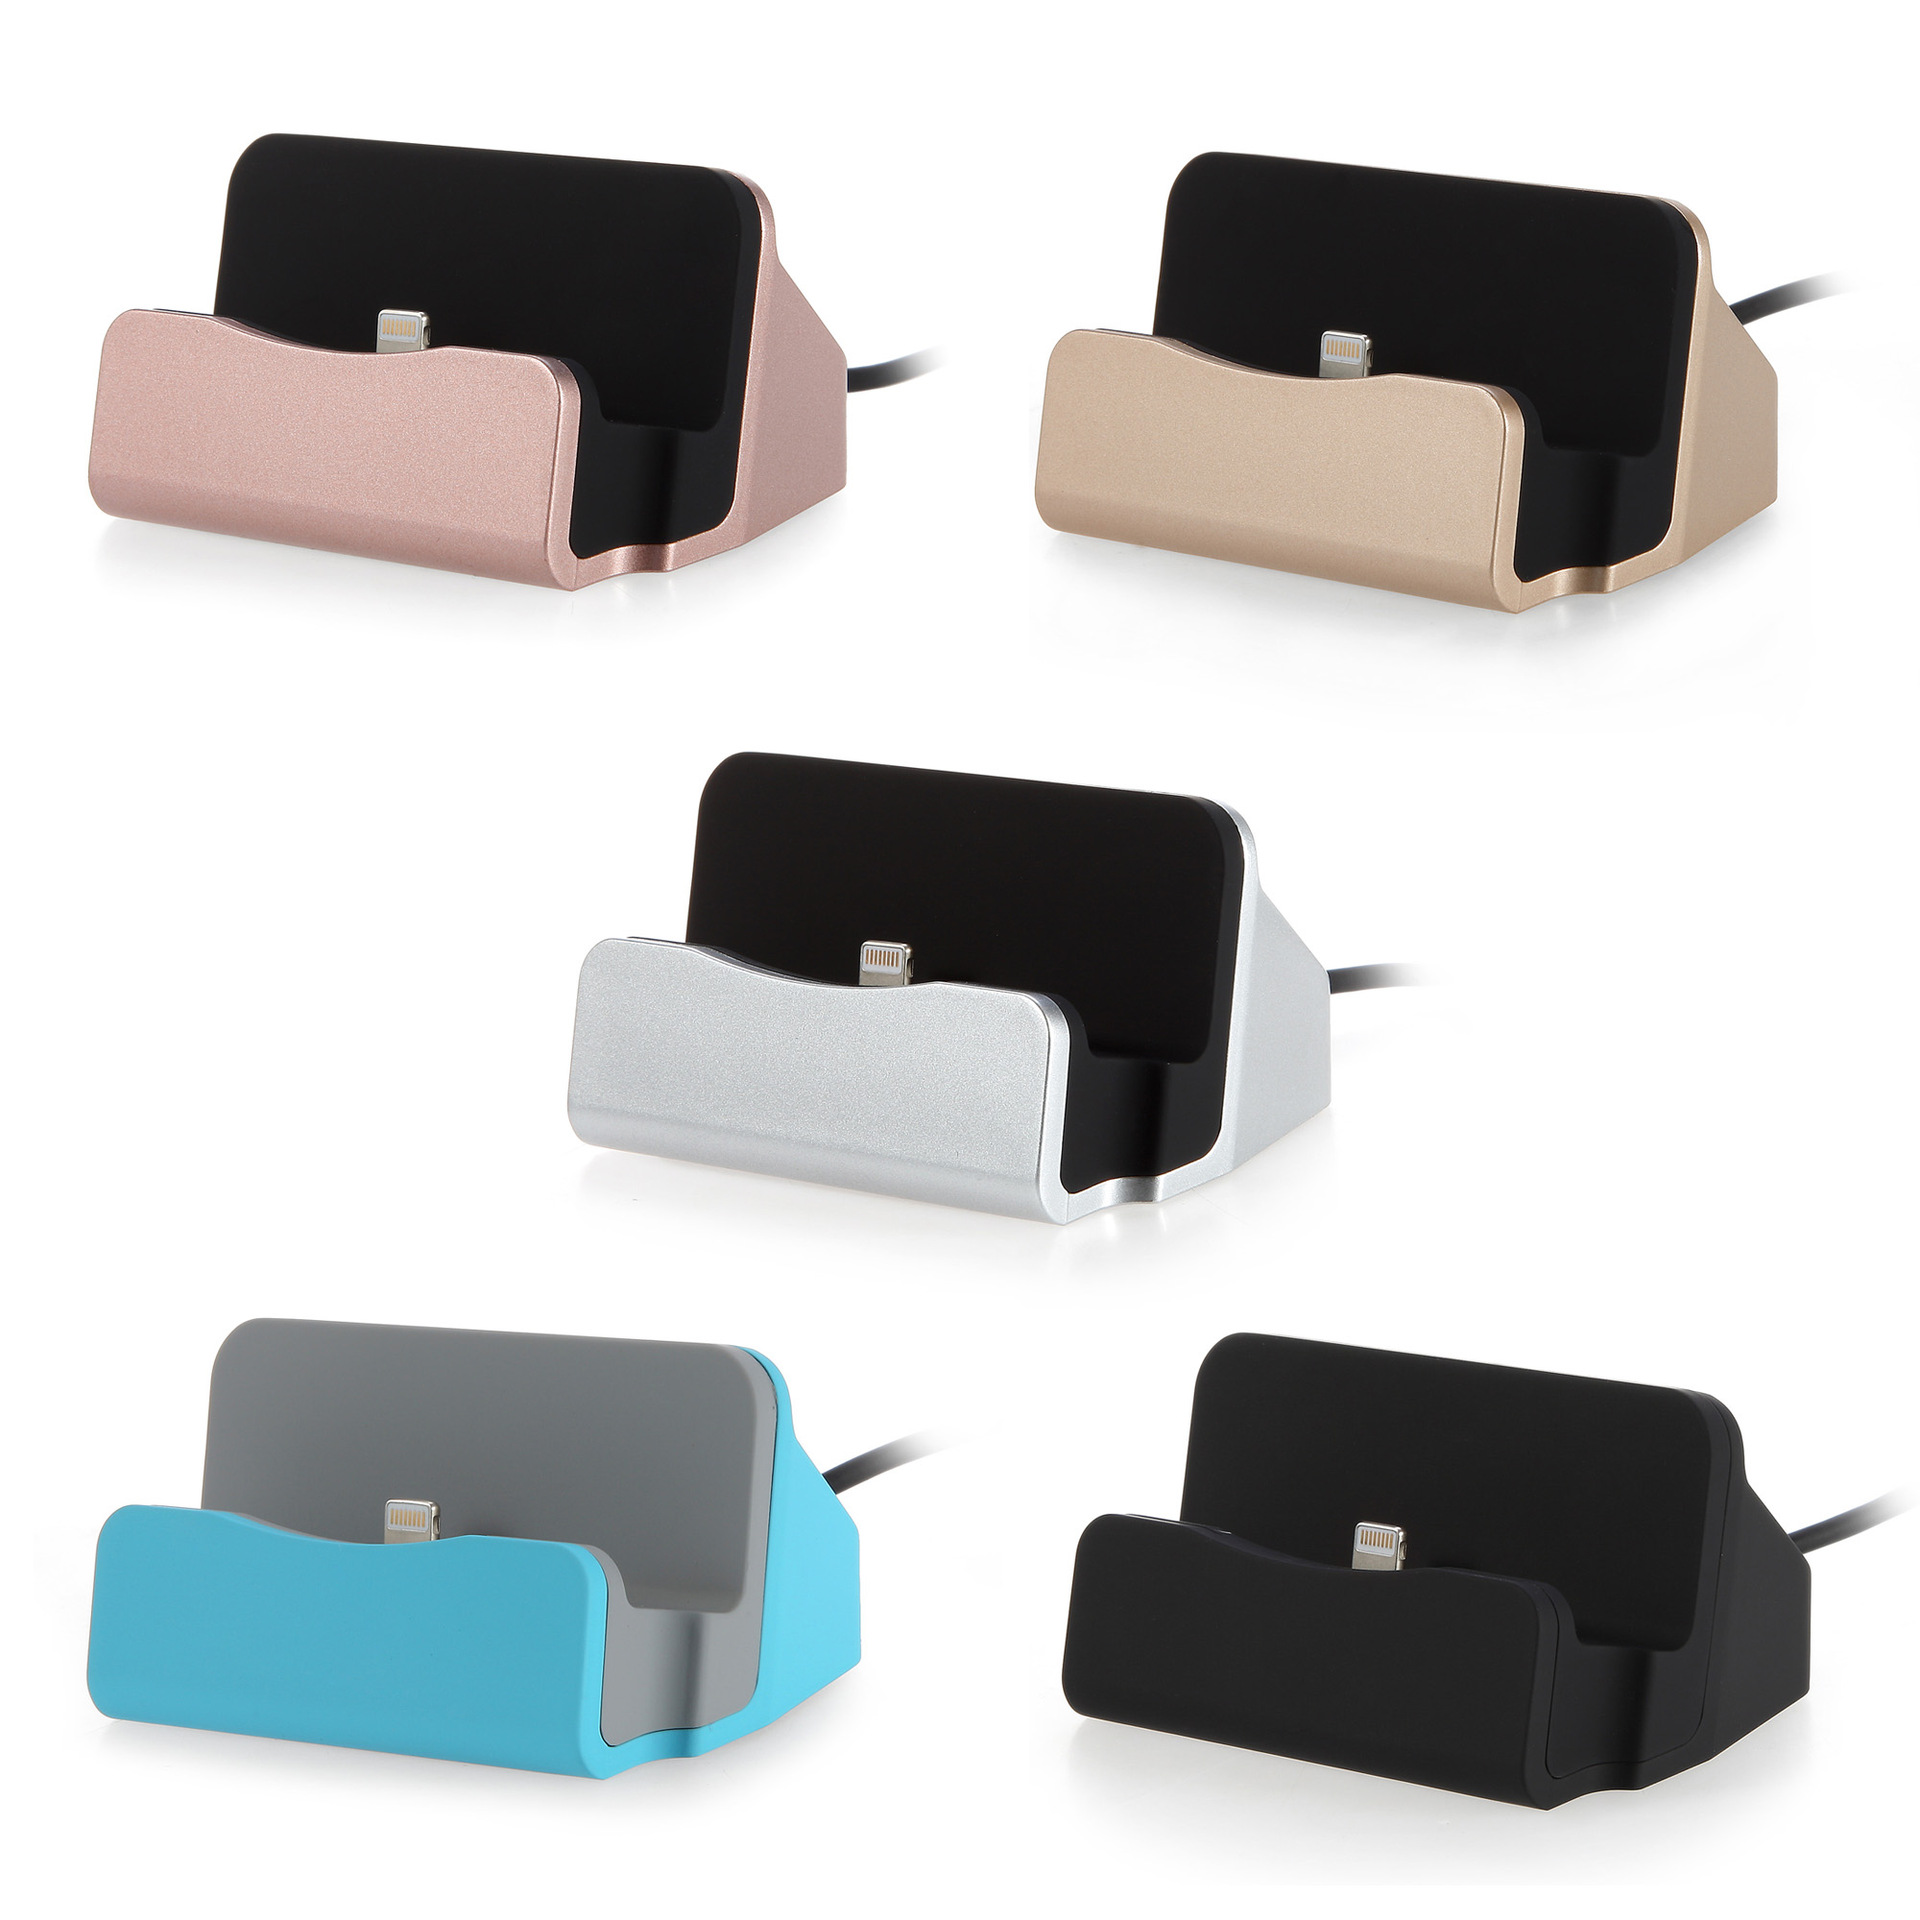 stand holder charging base dock station usb cable sync cradle charger base for xiaomi android type c samsung details 1